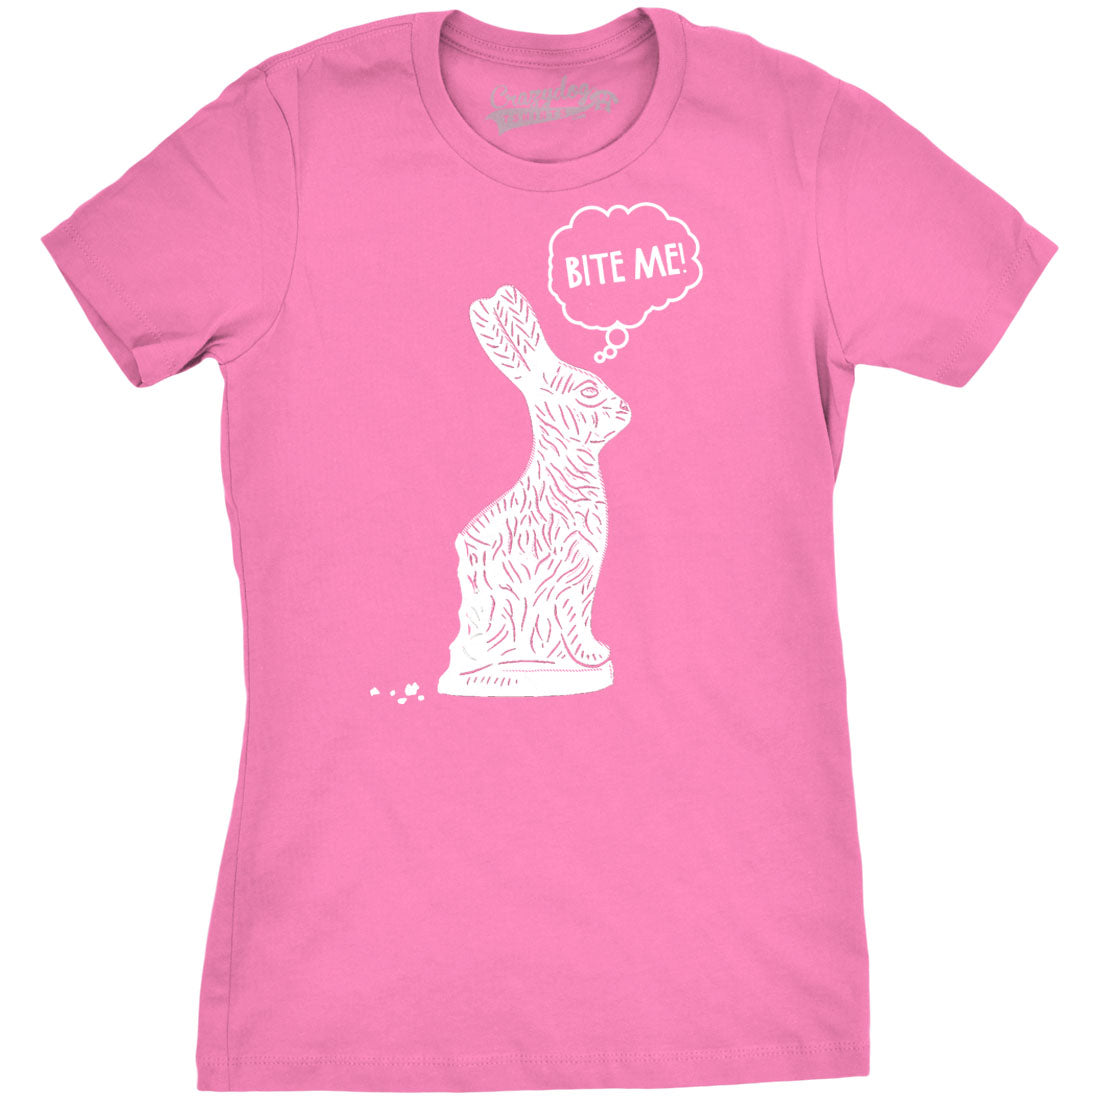 Funny Pink Bite Me Womens T Shirt Nerdy Easter Tee